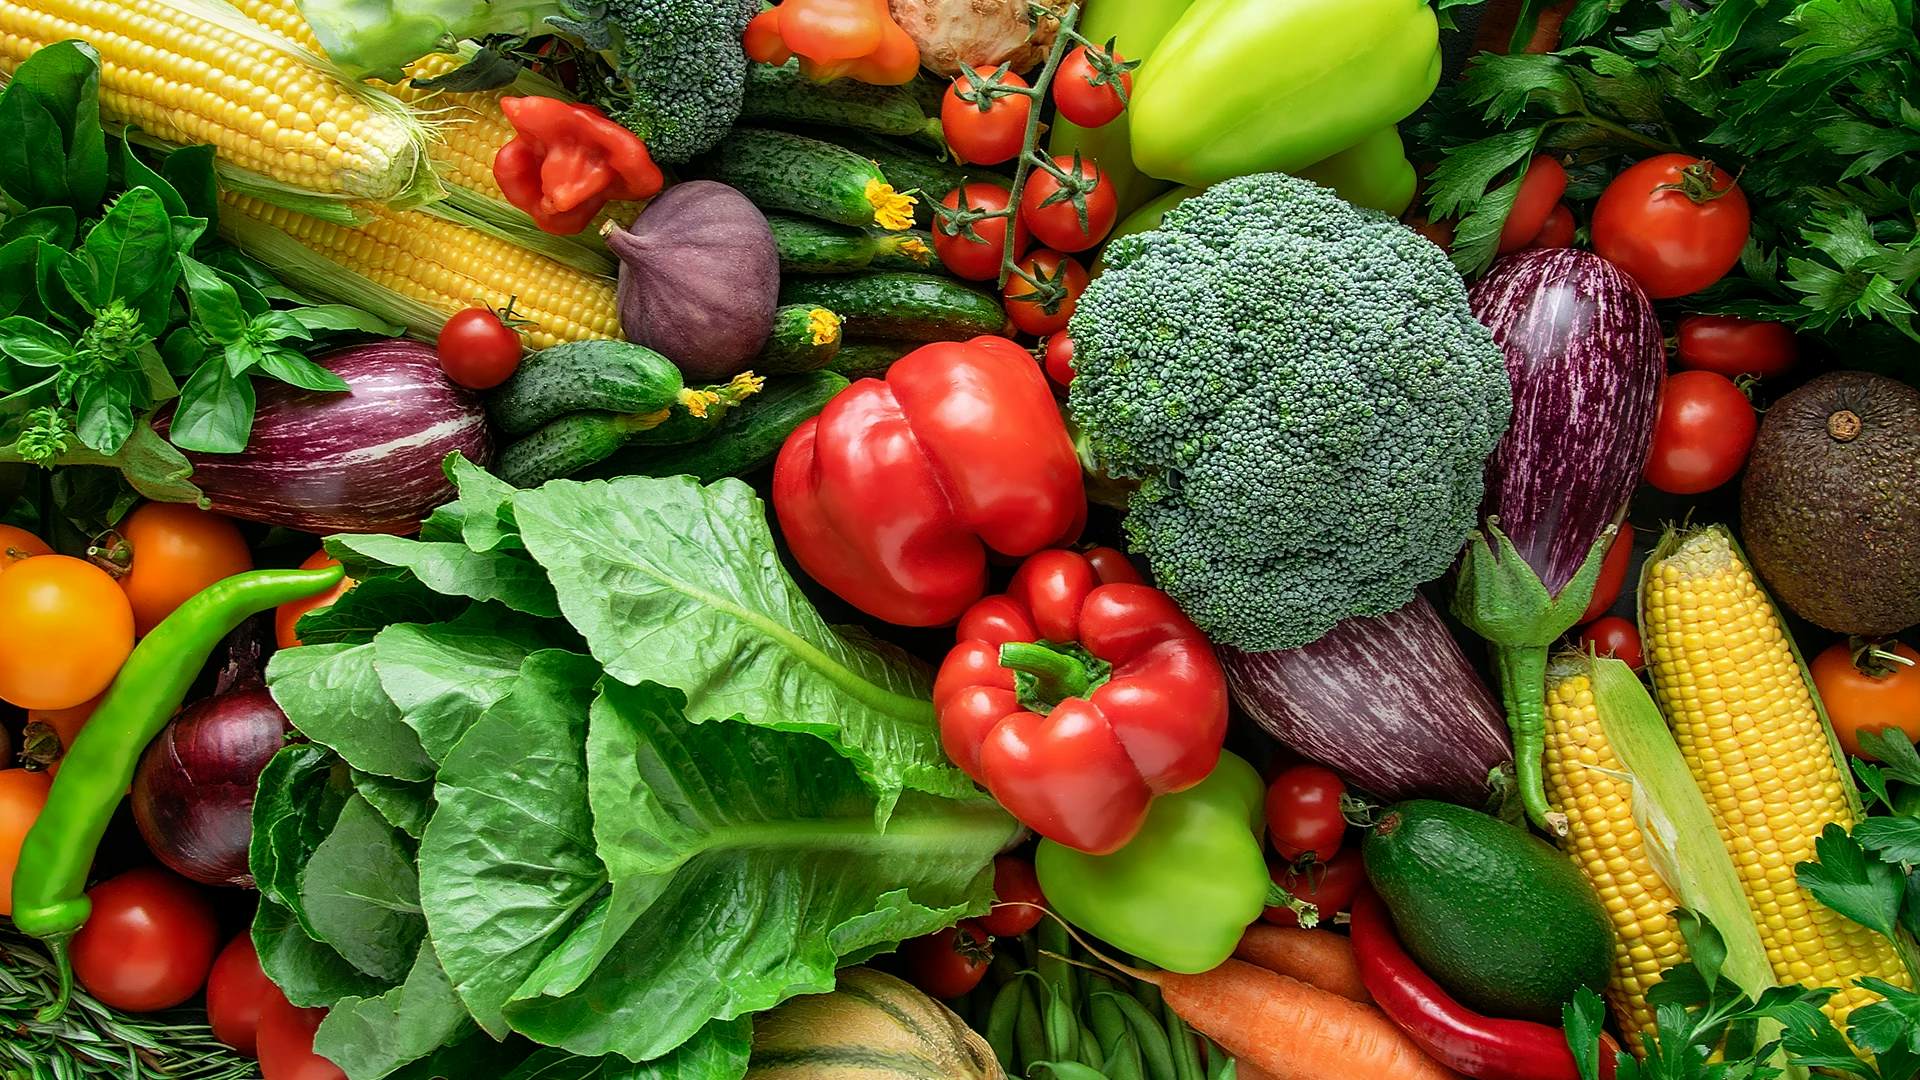 A colorful array of fresh vegetables.